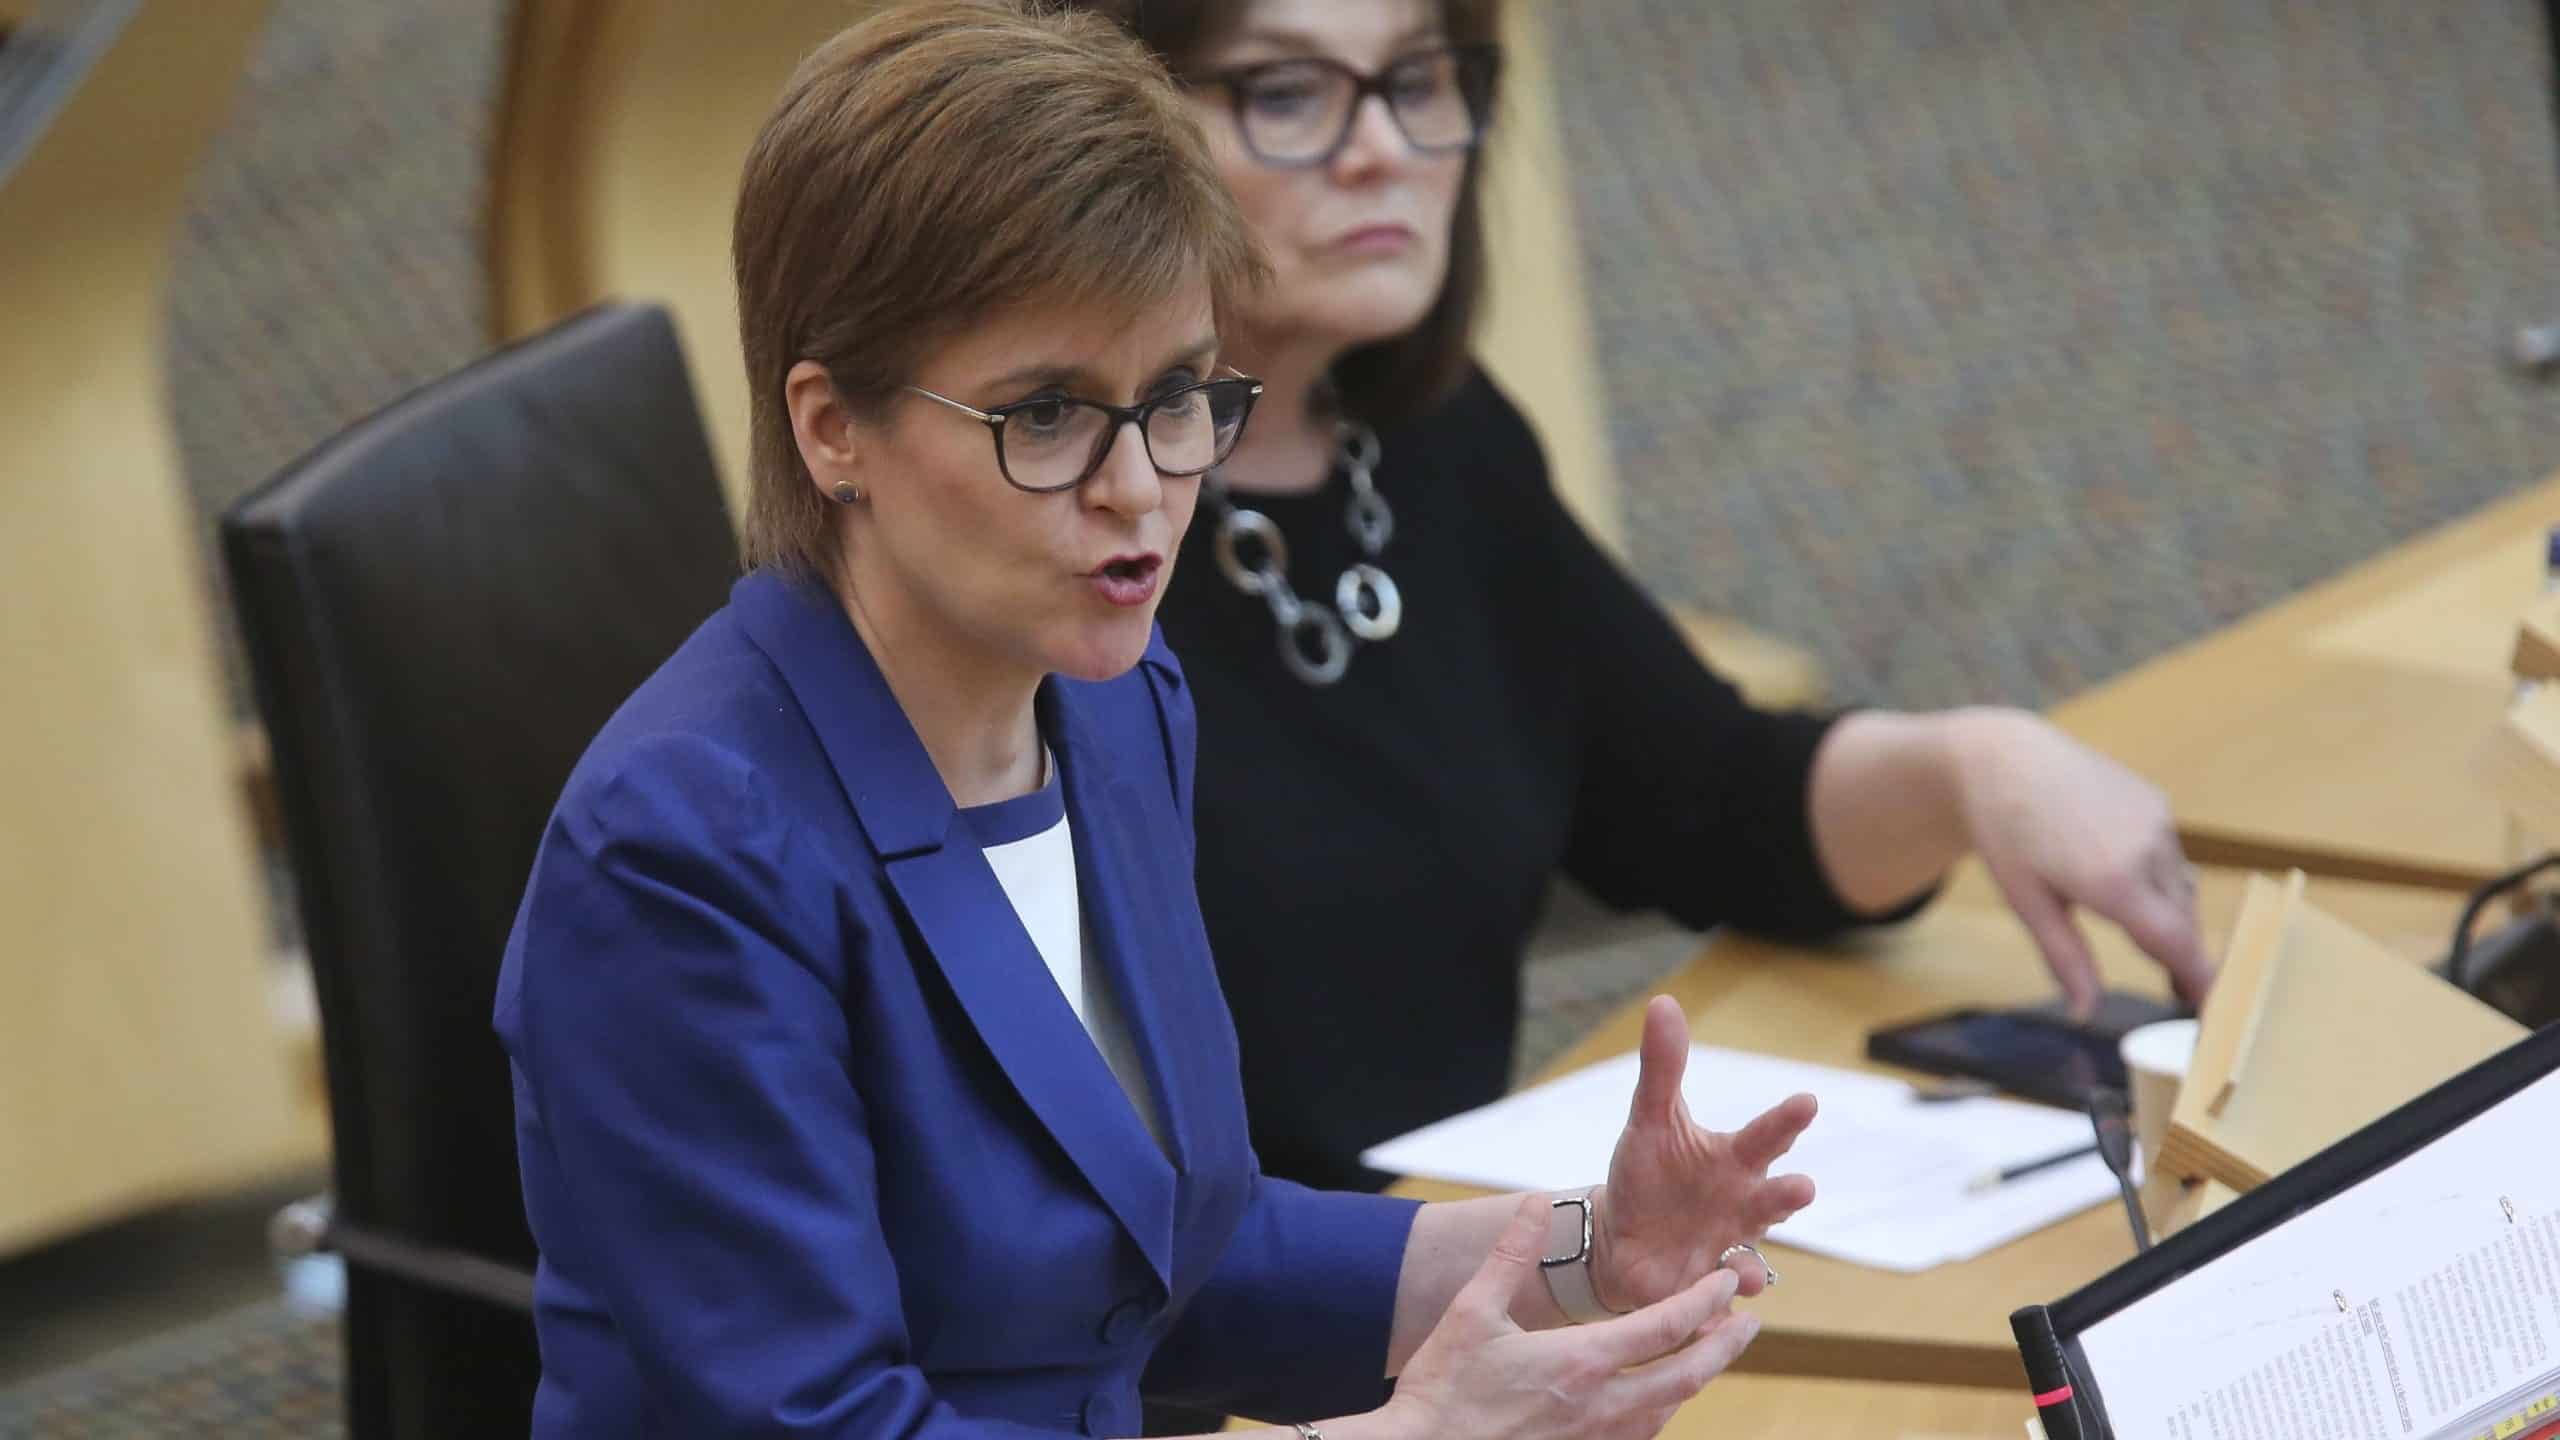 No ‘reckless race’ with England on easing lockdown, says Sturgeon